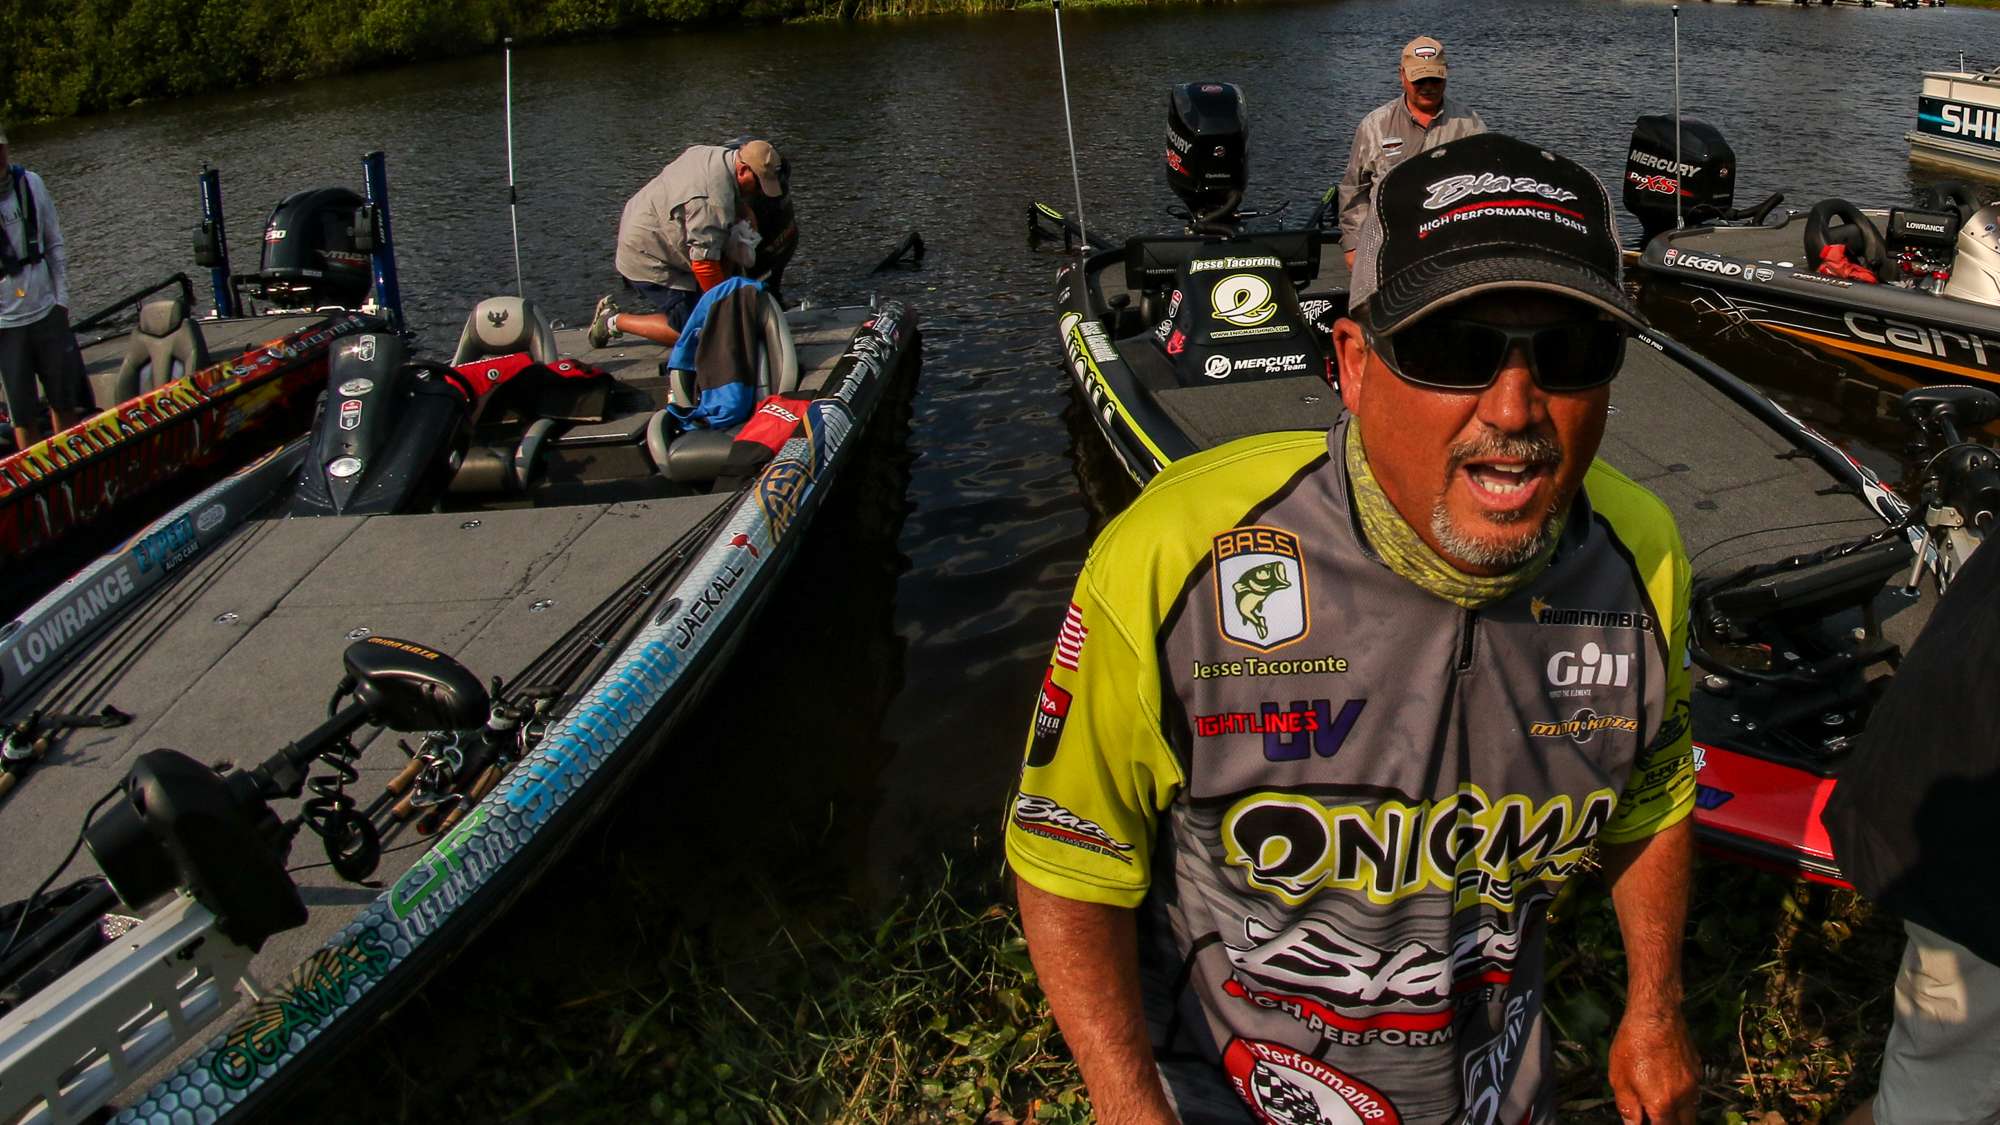 Jesse Tacoronte had plenty to holler about after sacking them on Day 2. 